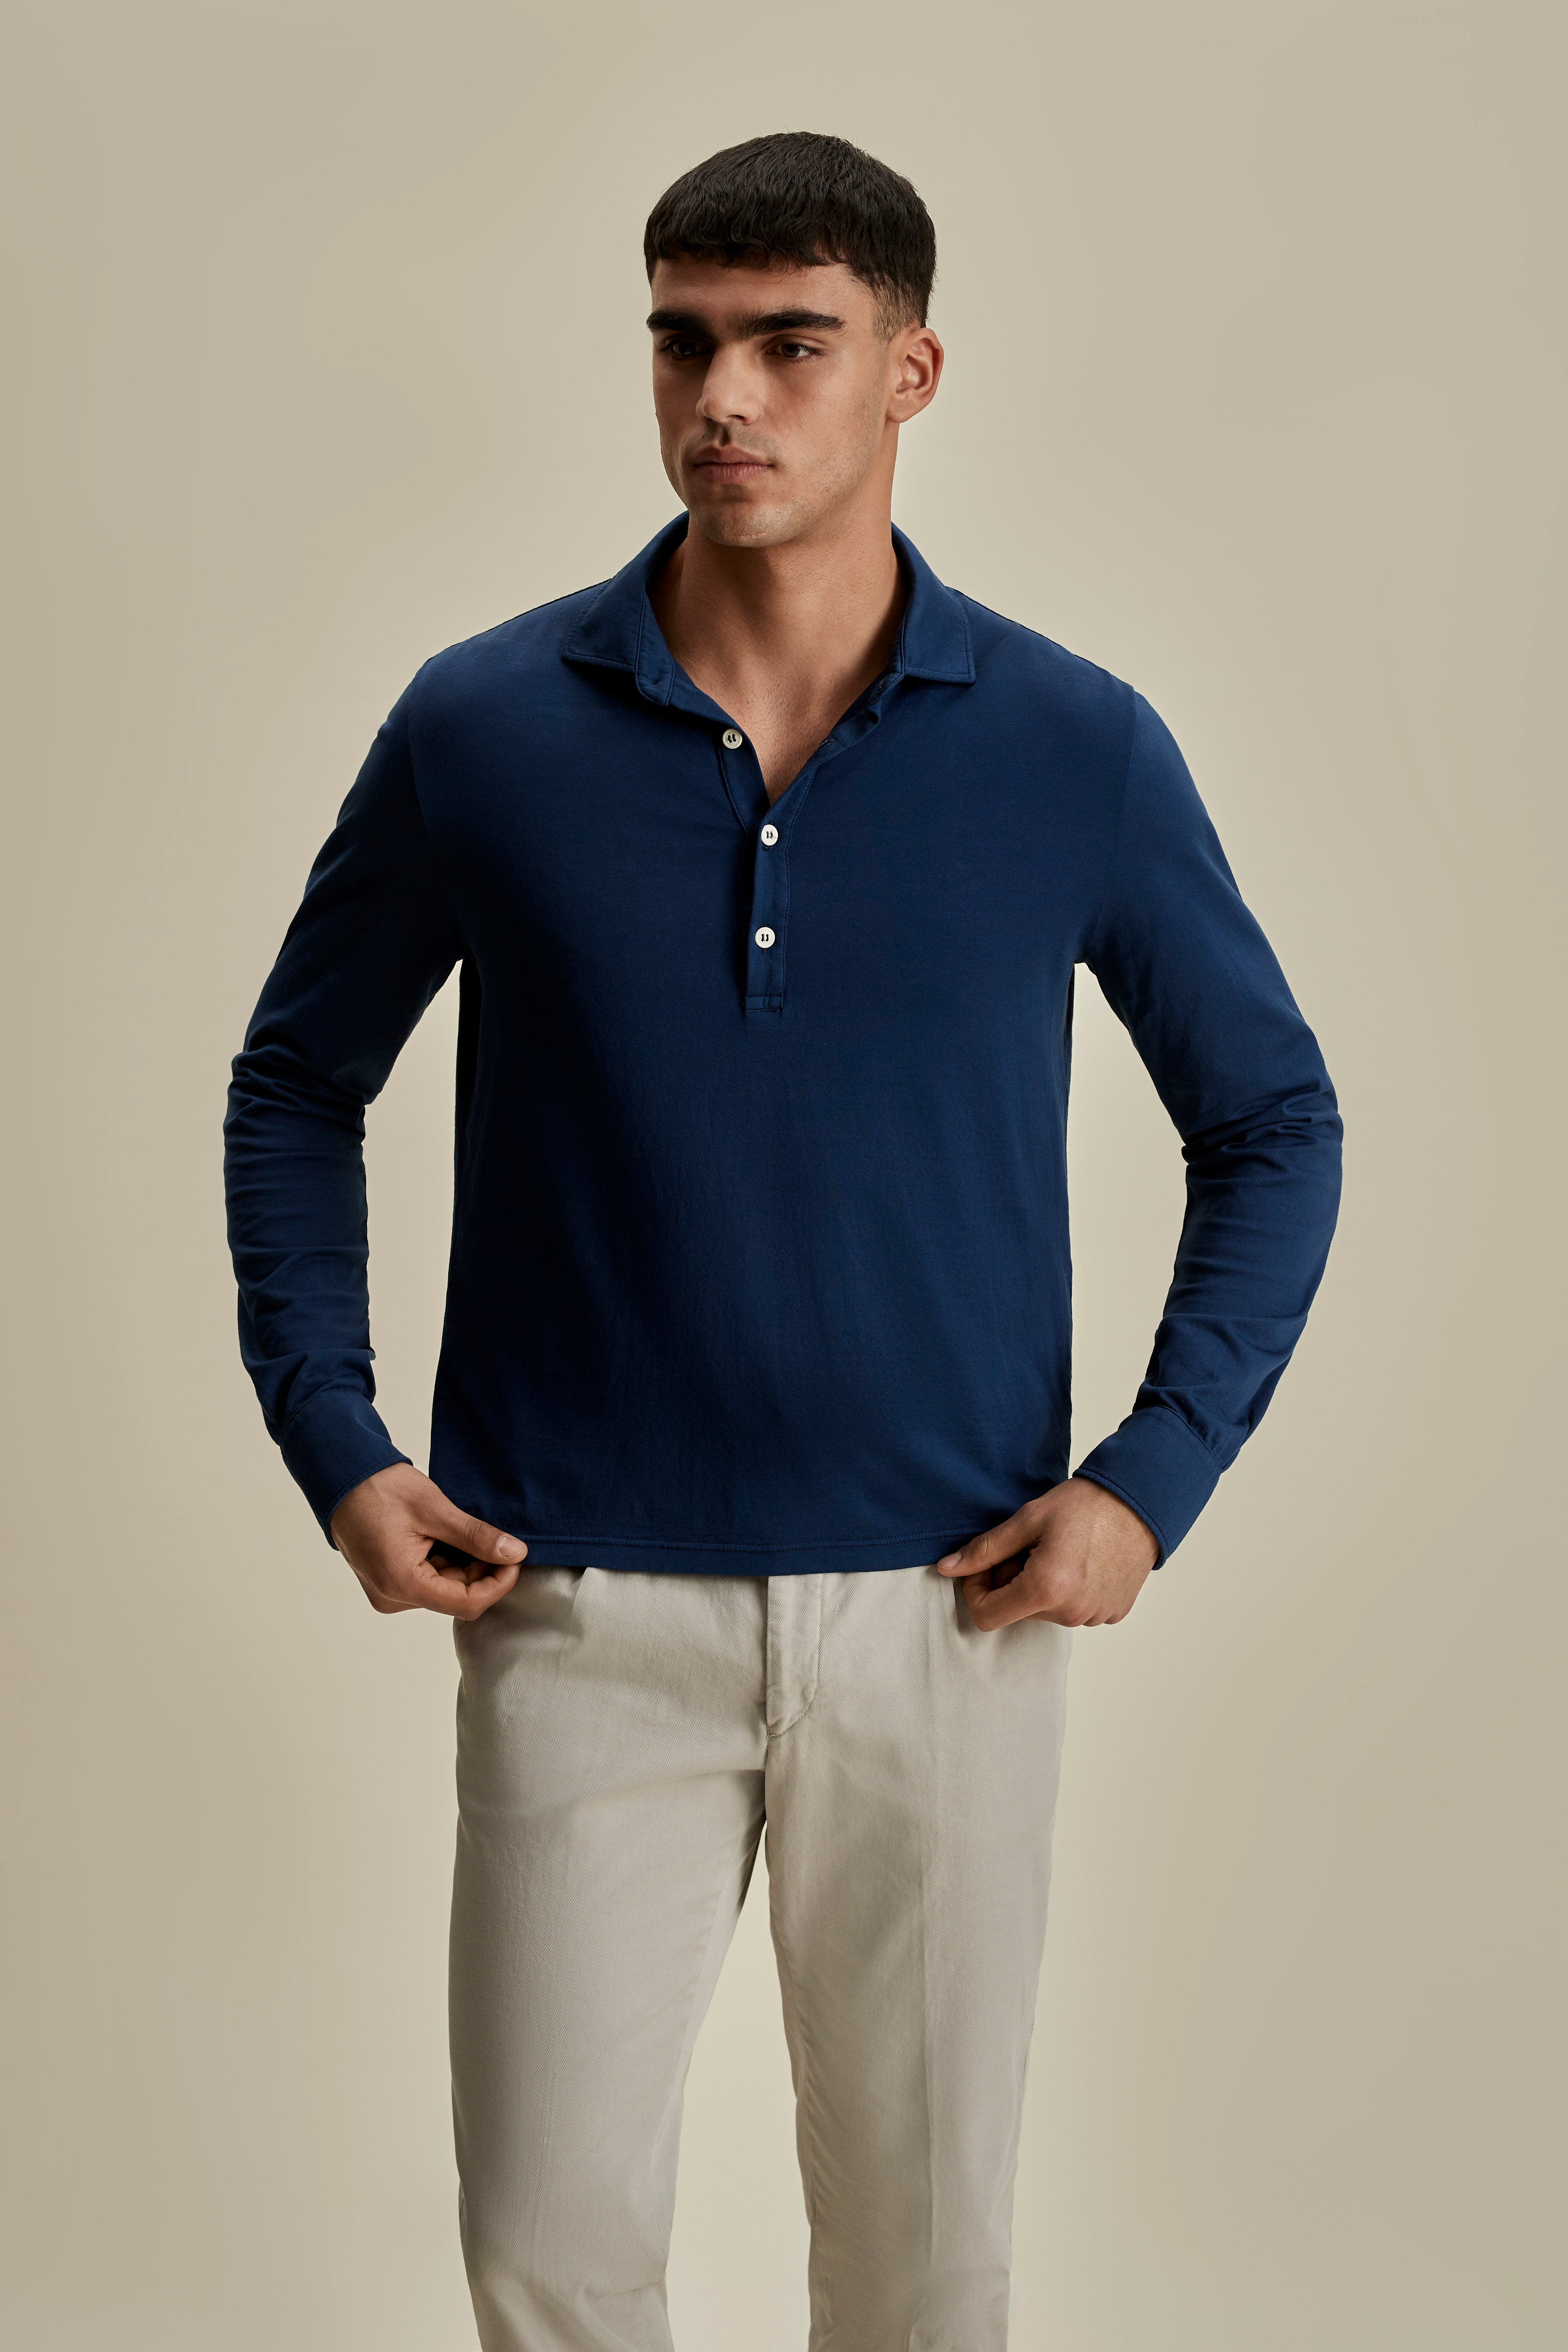 Cotton Long Sleeve Polo Shirt Navy Mid Crop Model Image